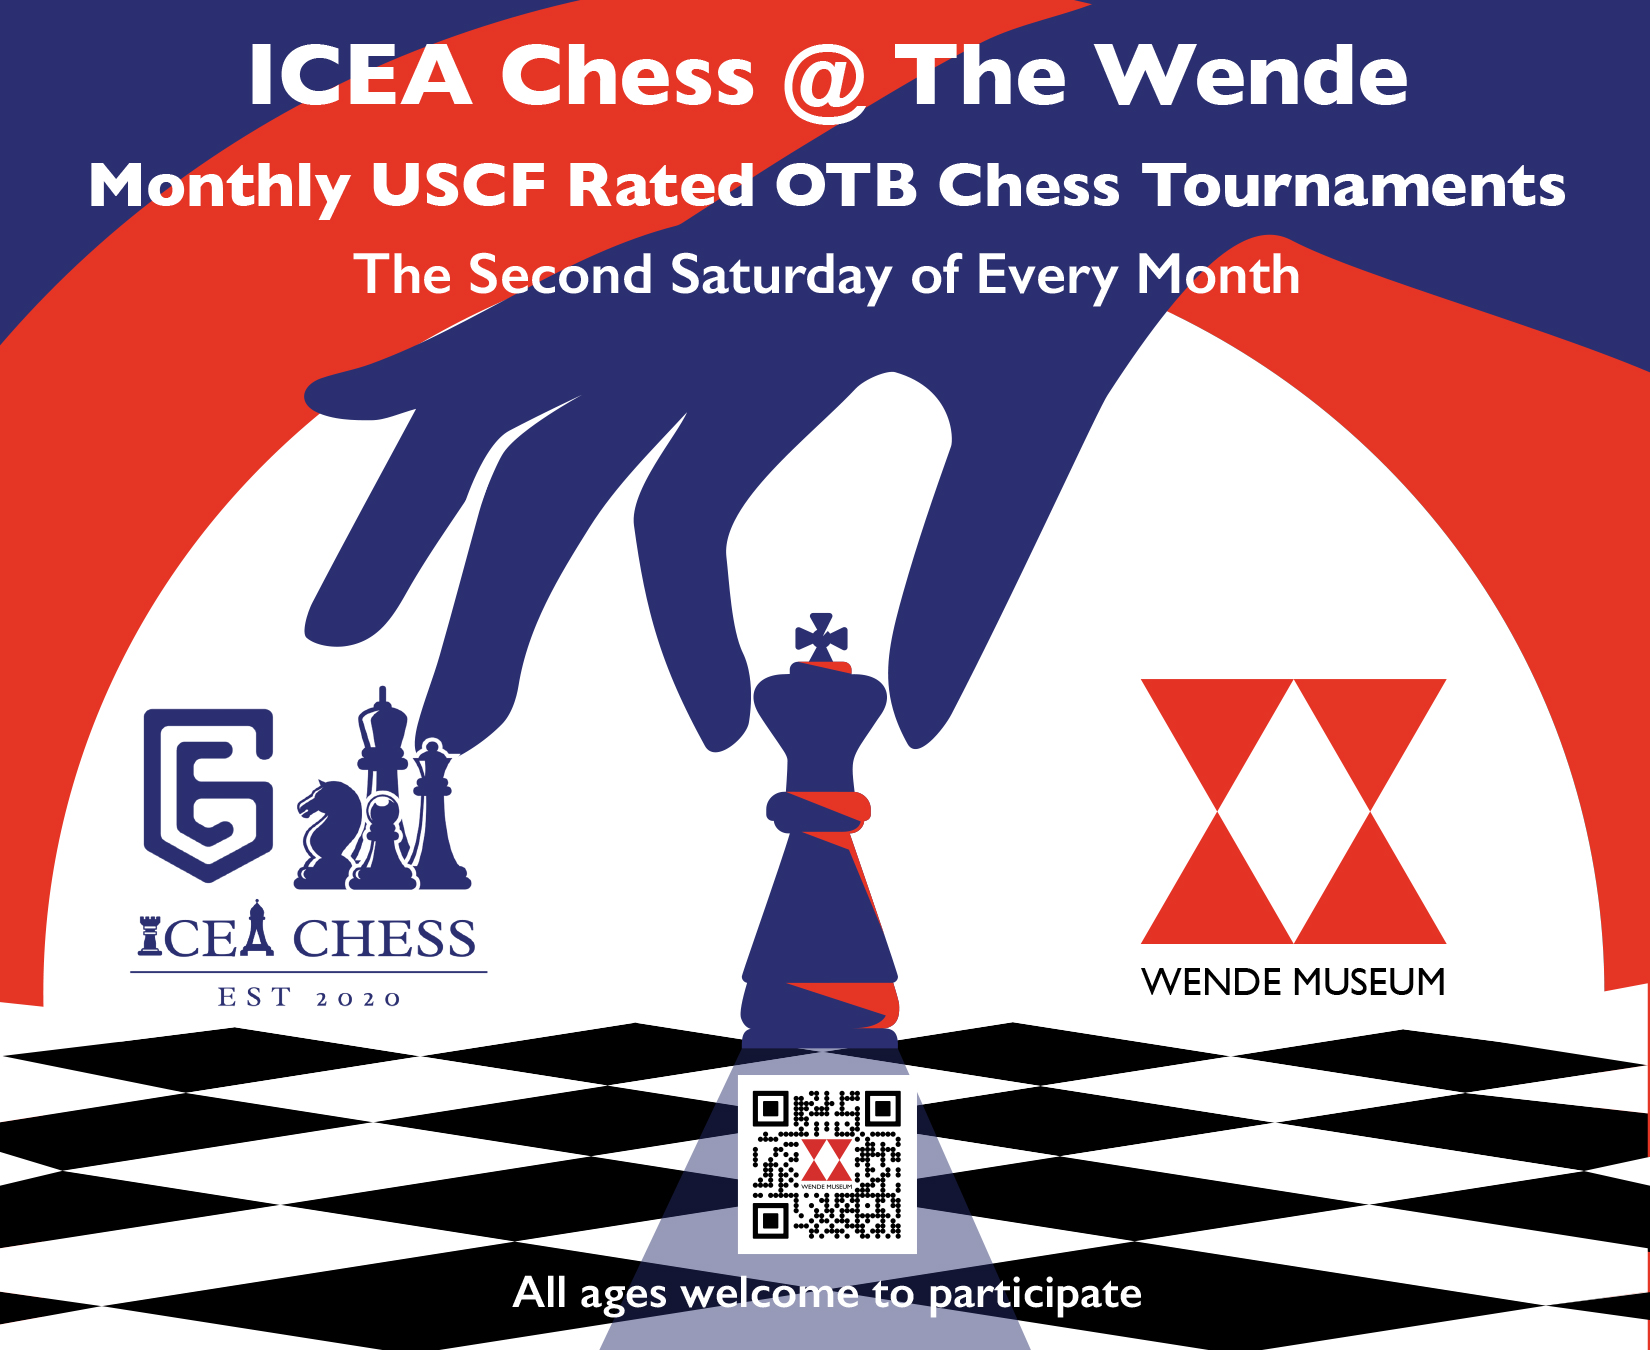 ICEA Chess @ The Wende